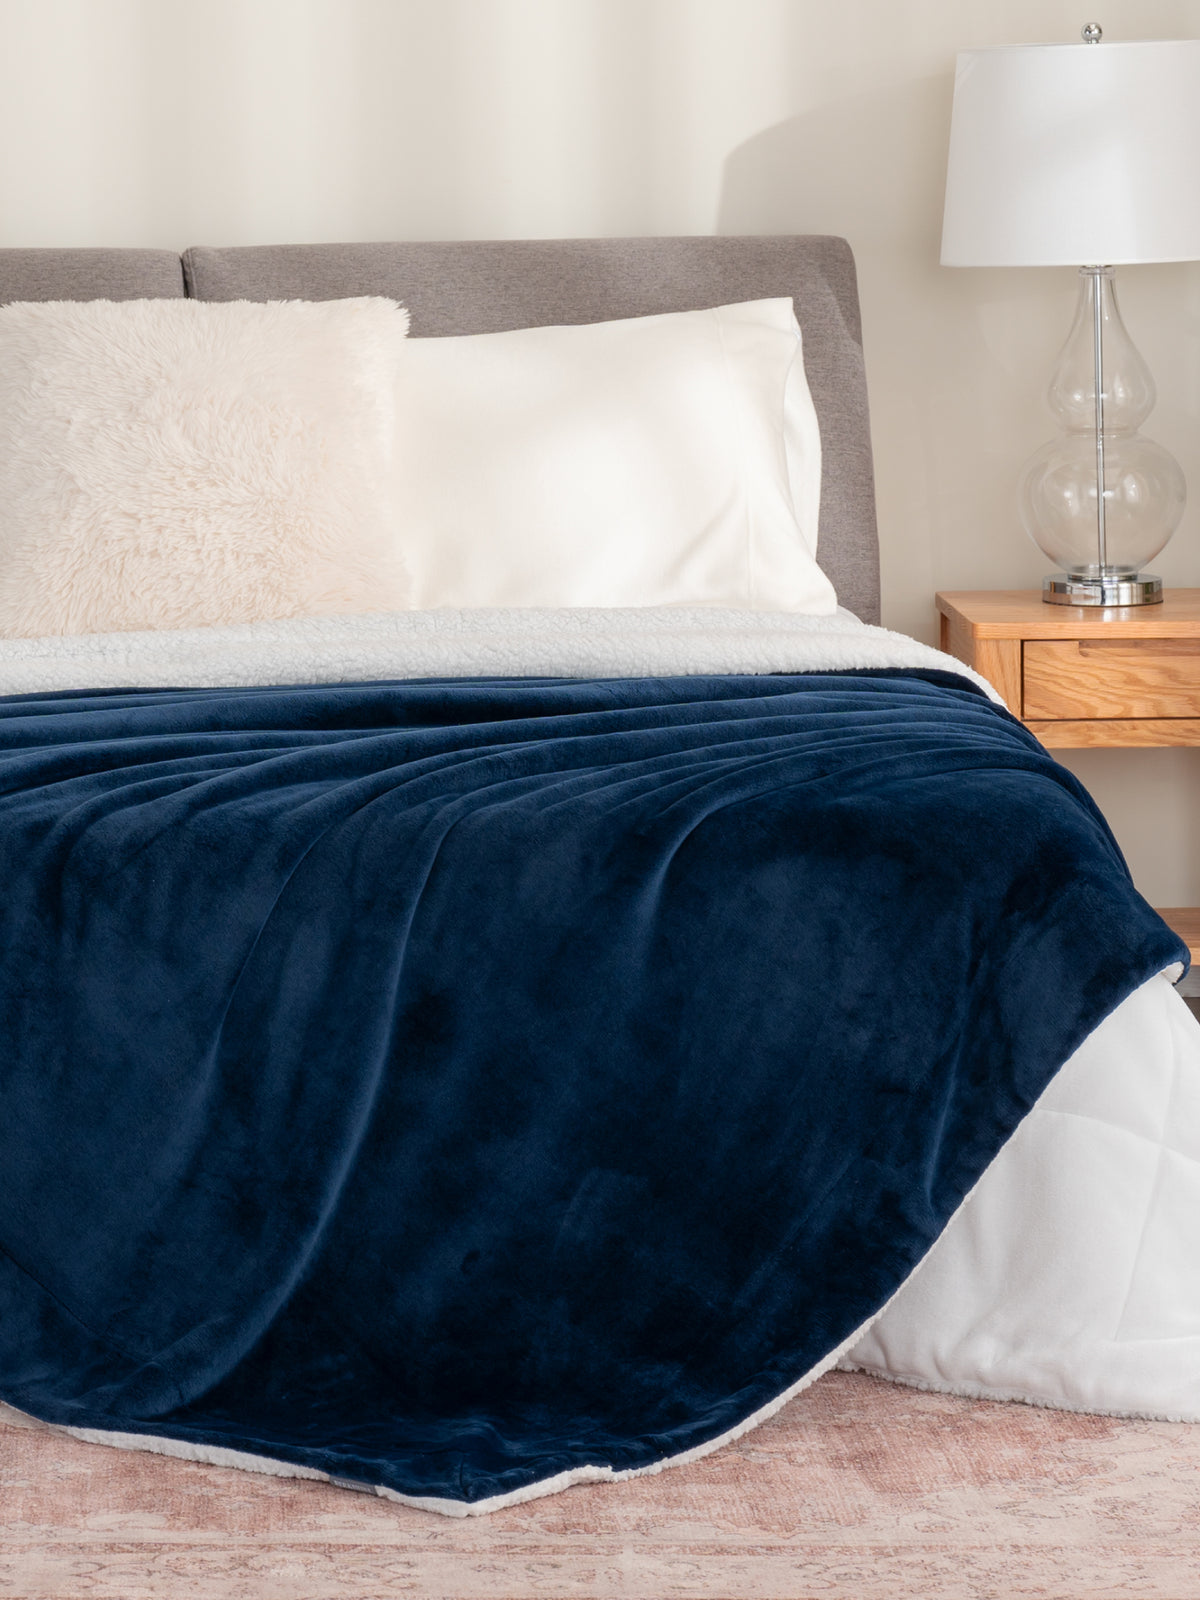 Blankets collection image featuring our VelvetLoft Sherpa Blanket in navy draped over a white bed.